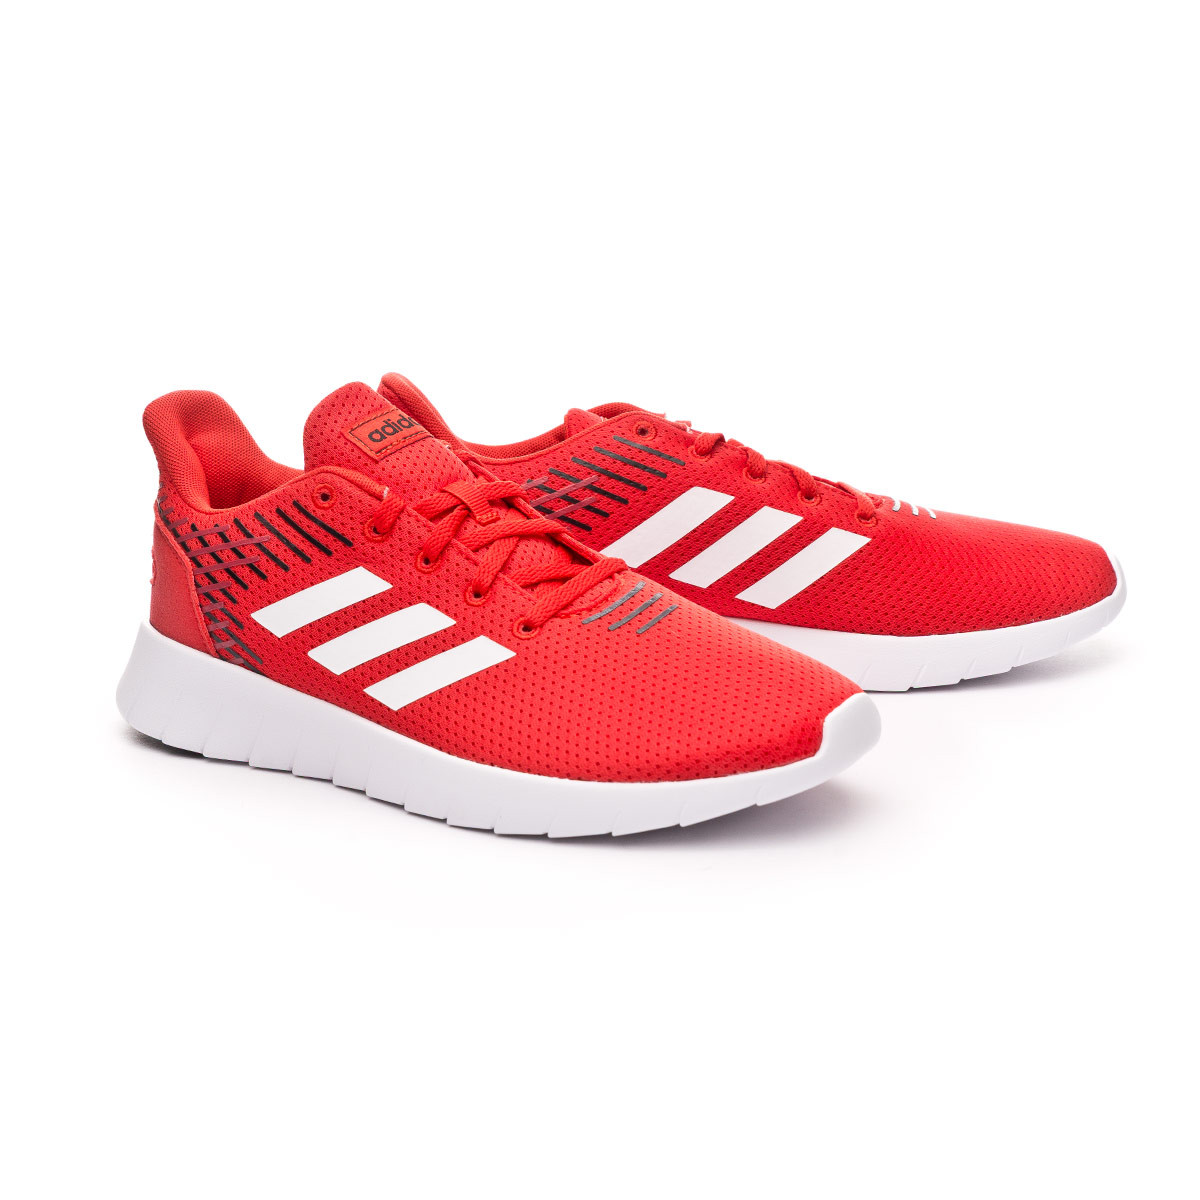 Trainers adidas Asweerun Active red-White-Core black - Football store  Fútbol Emotion